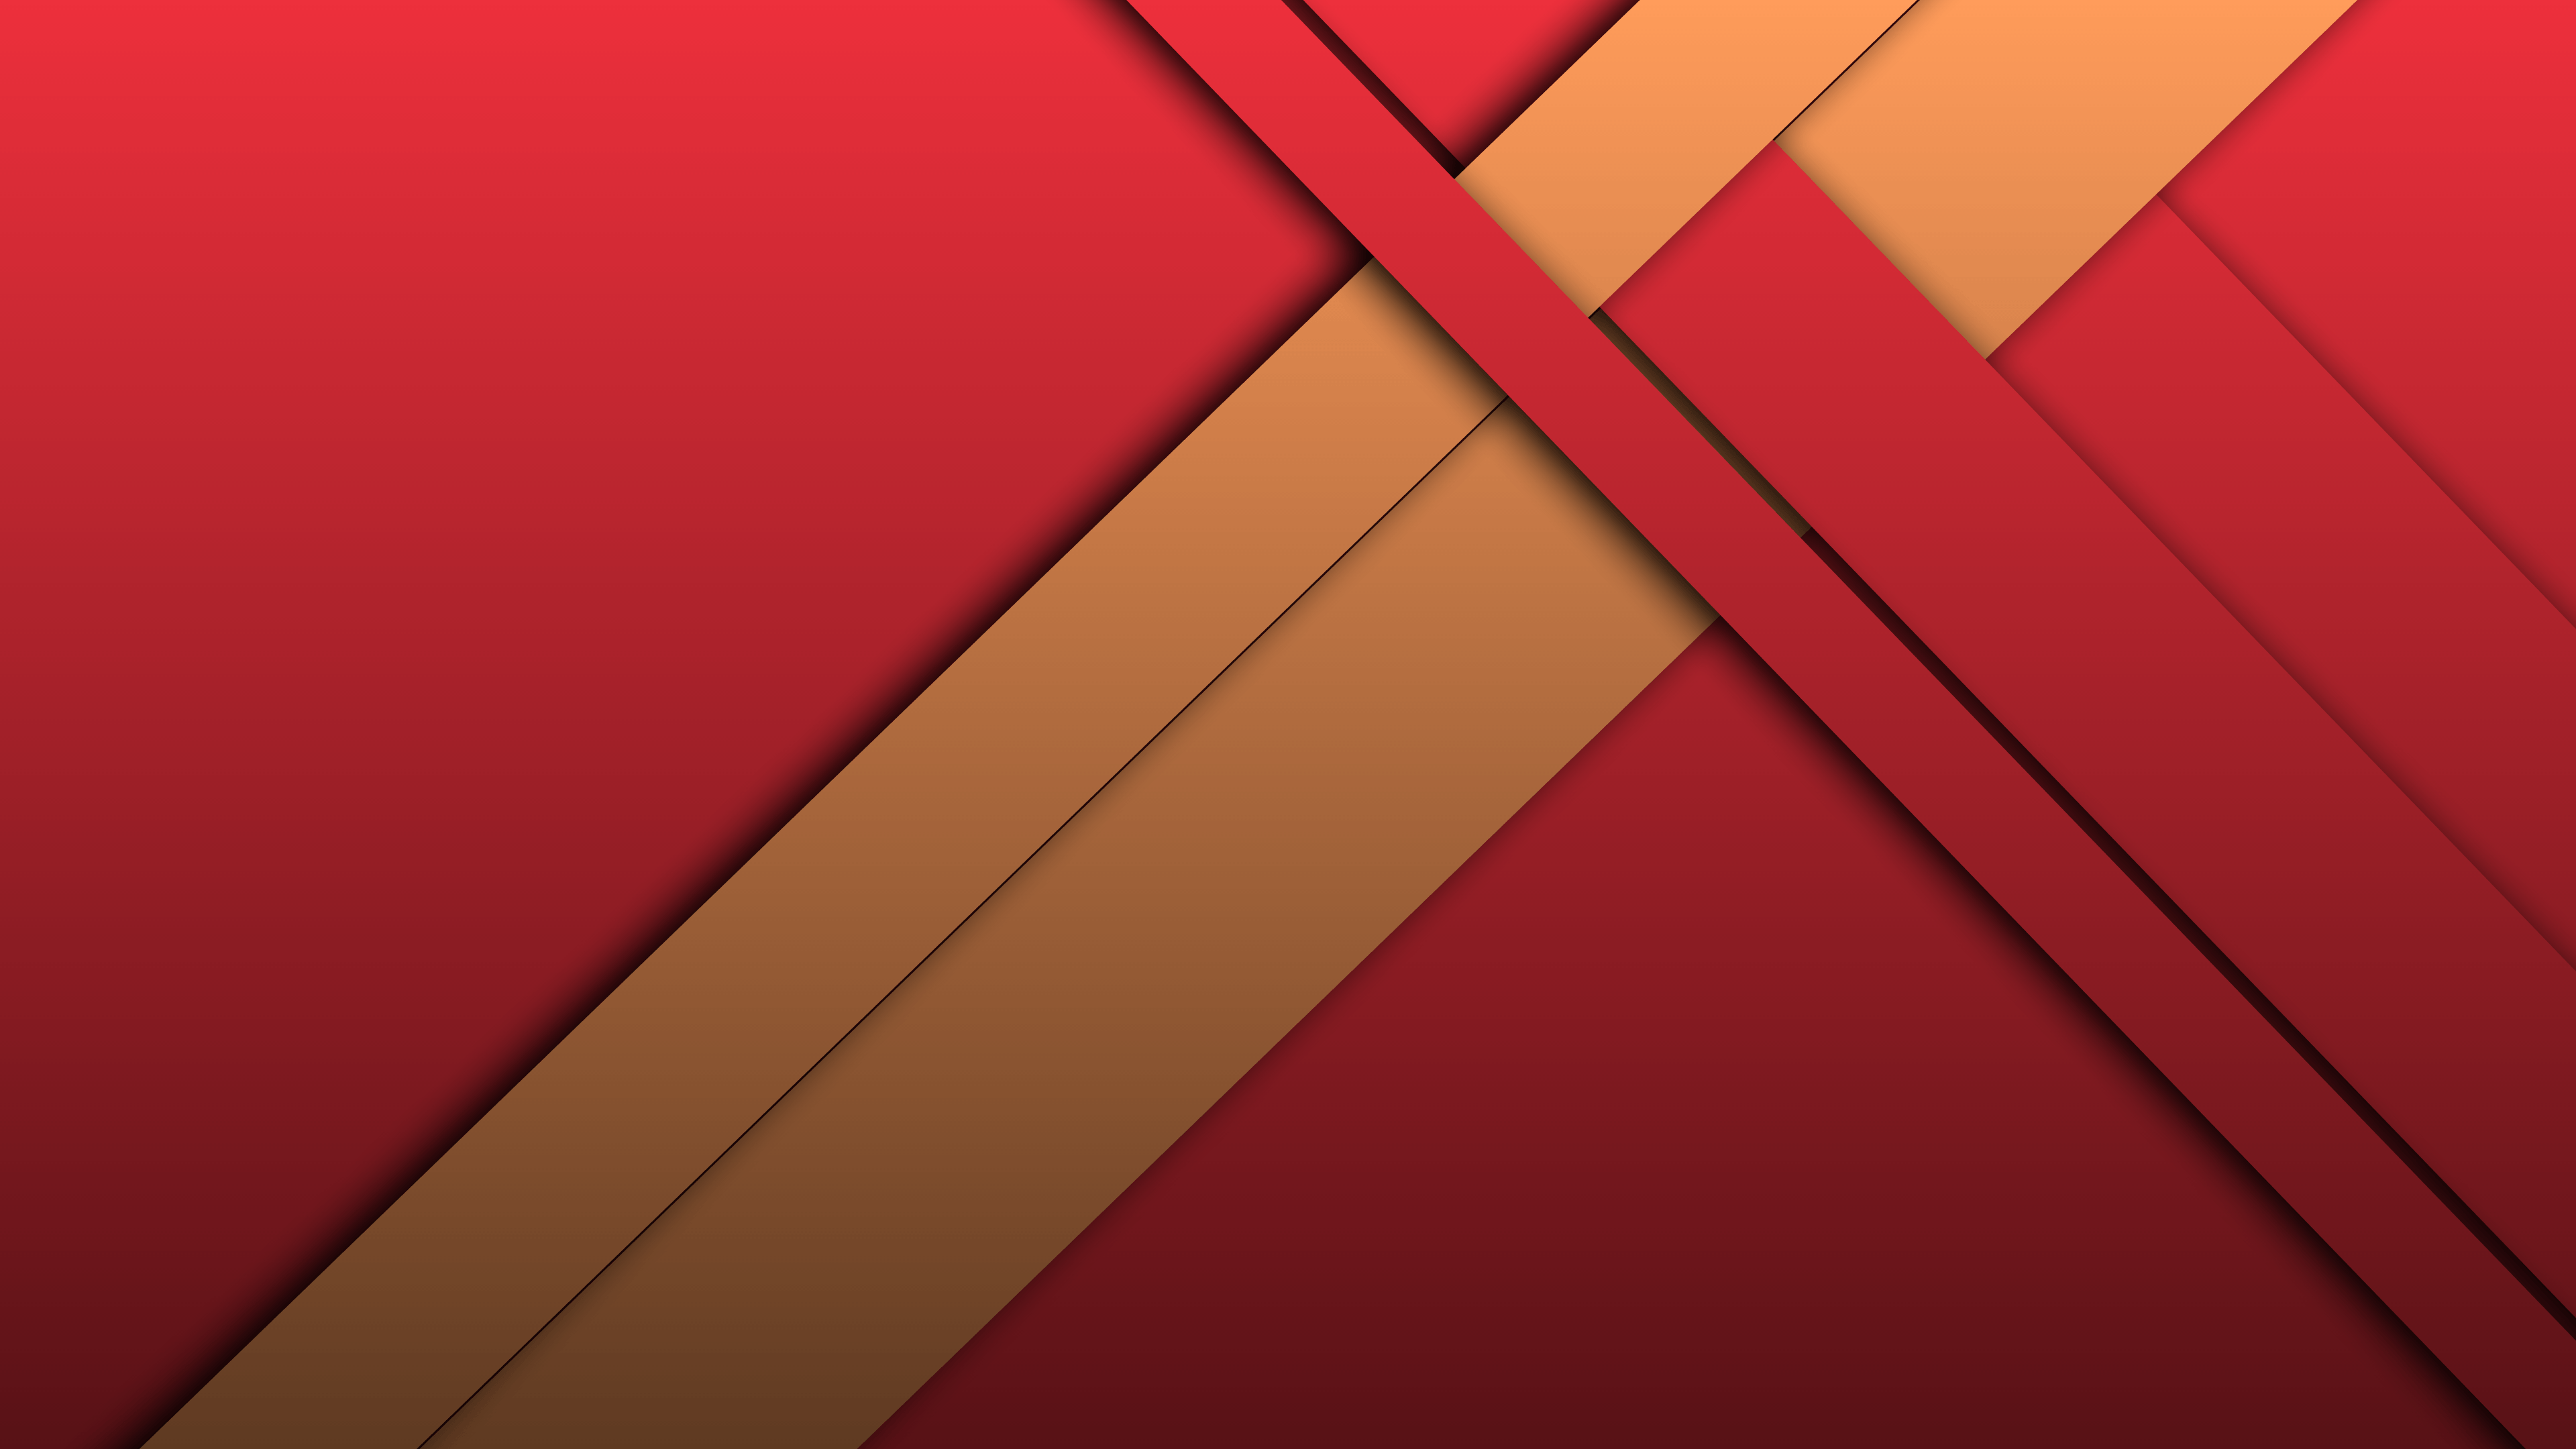 Black Red Asymmetry 4K 8K HD Abstract Wallpapers  HD Wallpapers  ID 69249